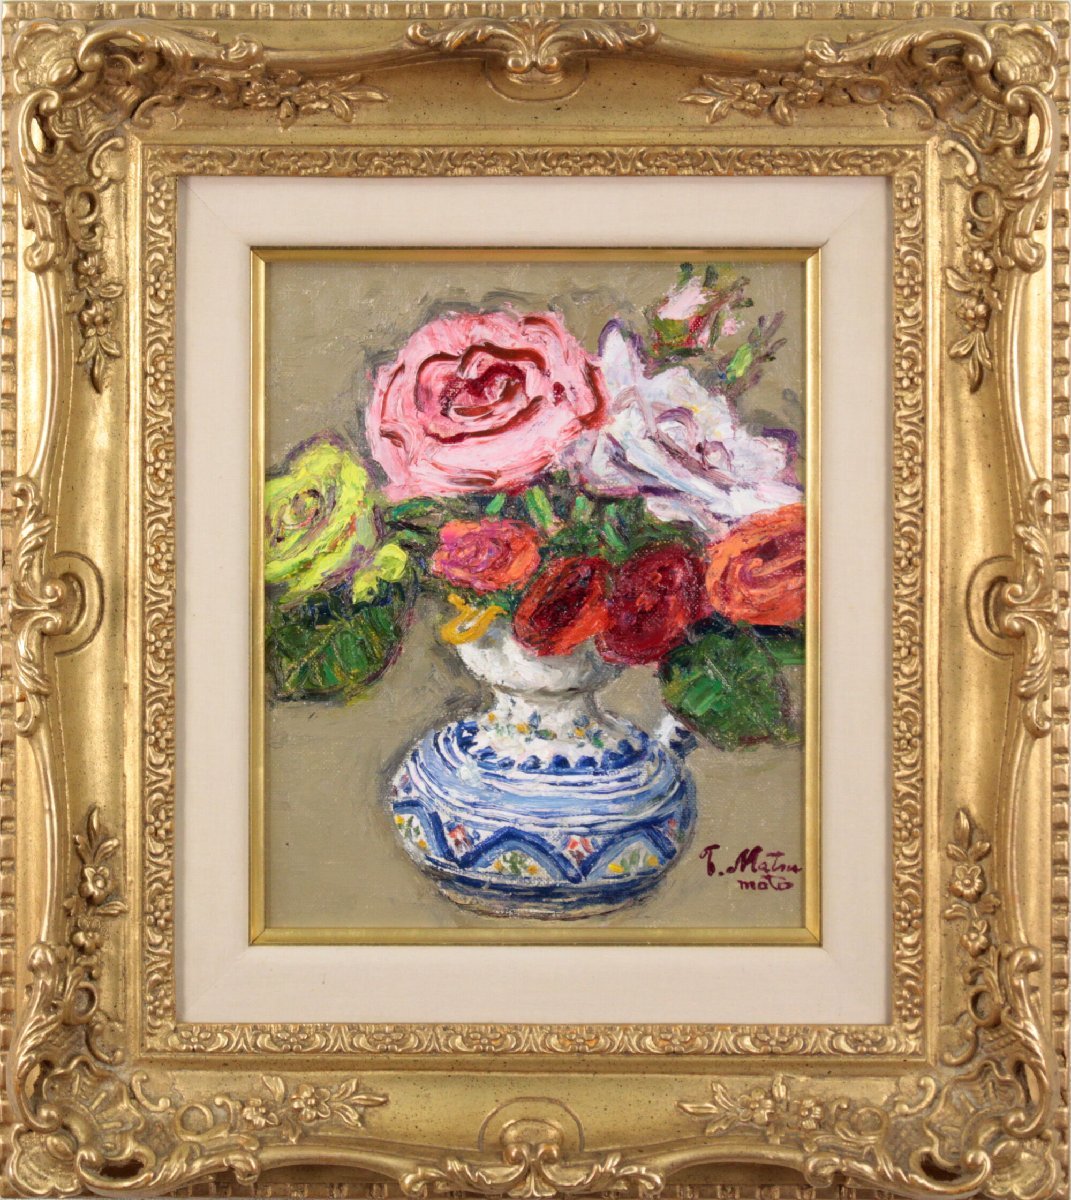 Tomitaro Matsumoto Rose in a Spanish Urn Oil Painting [Authenticity Guaranteed] Painting - Hokkaido Gallery, painting, oil painting, still life painting